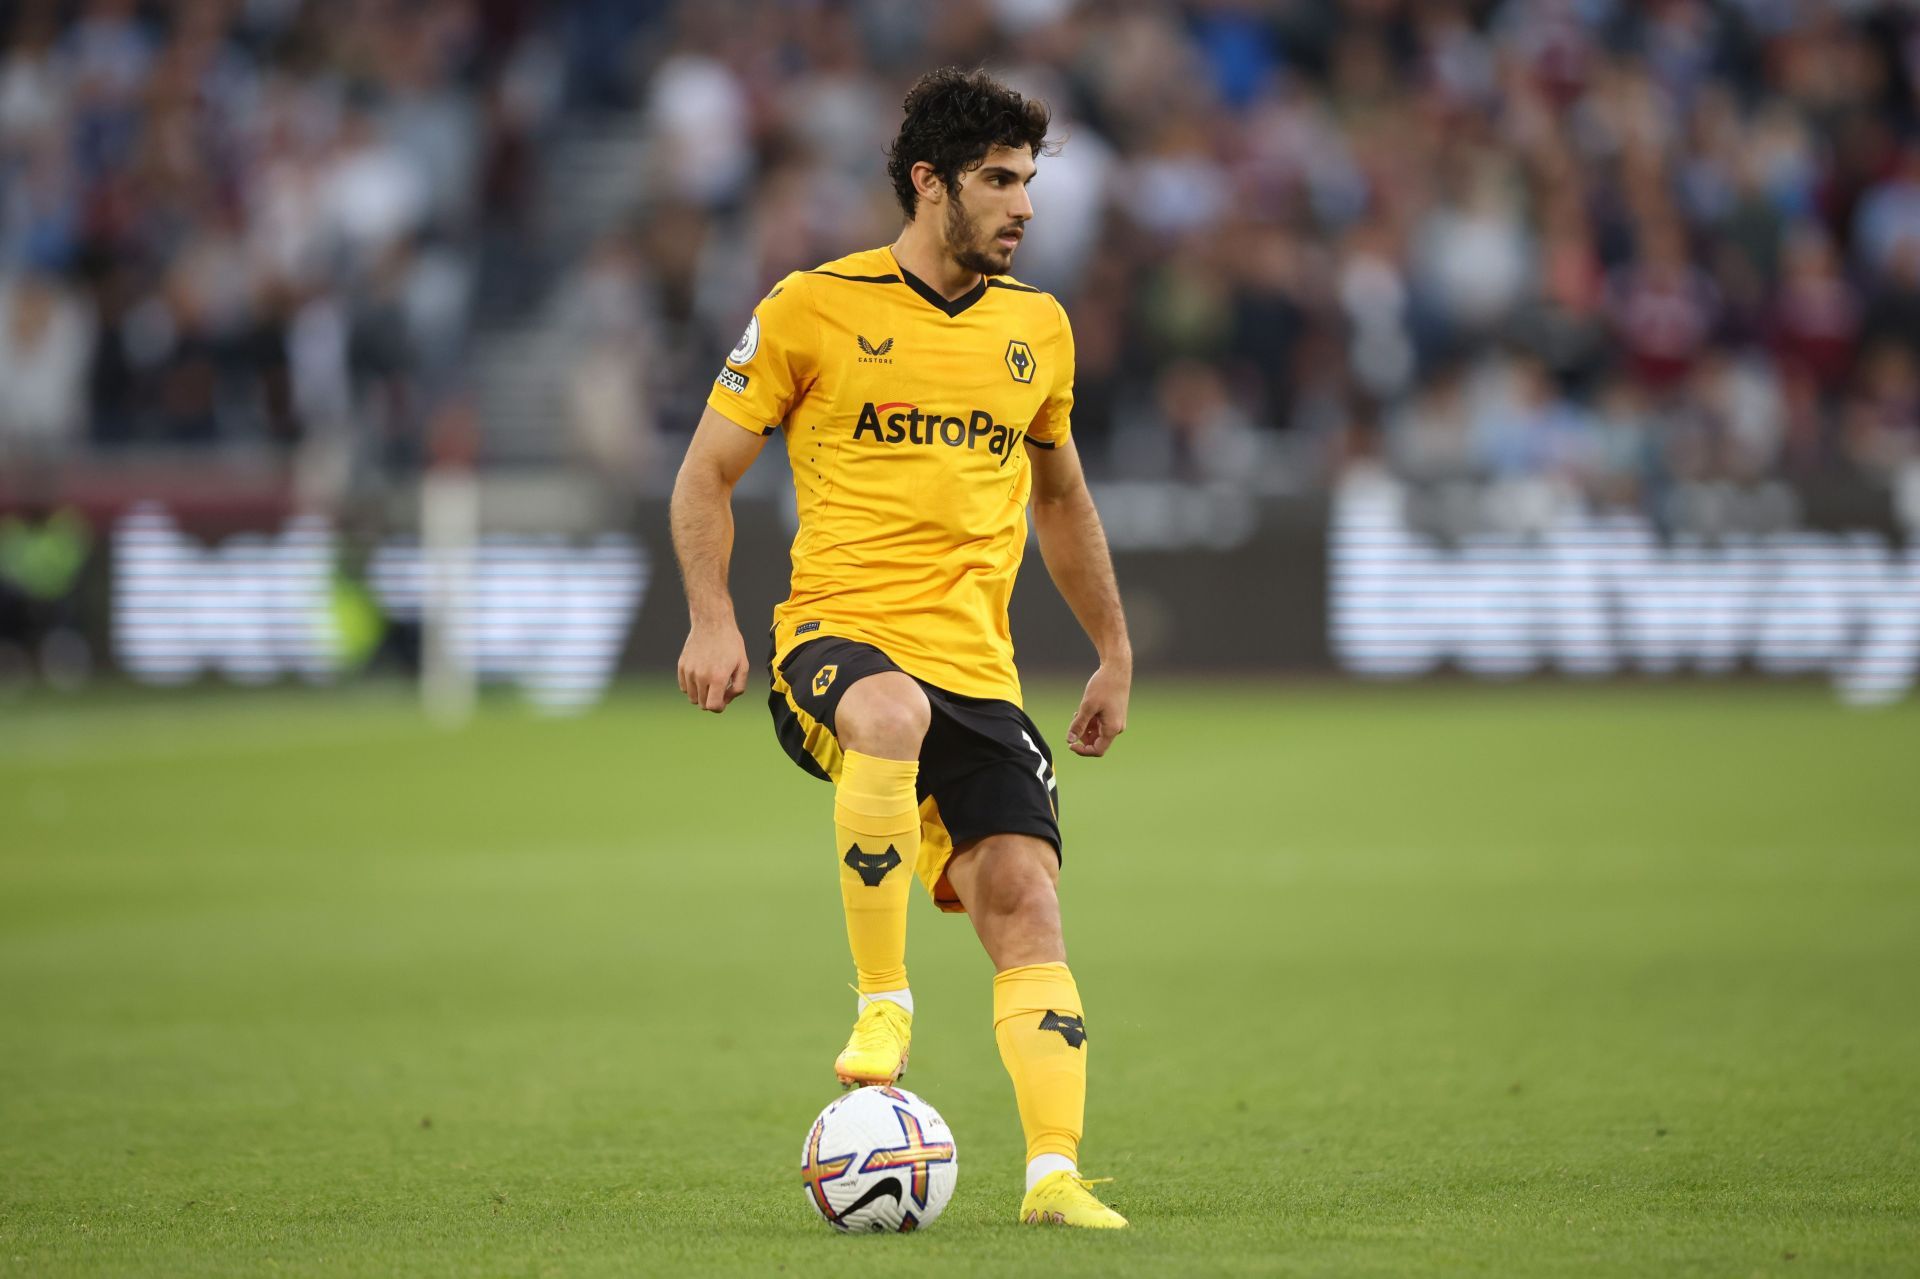 Goncalo Guedes is yet to show his true capabilities in a Wolves jersey